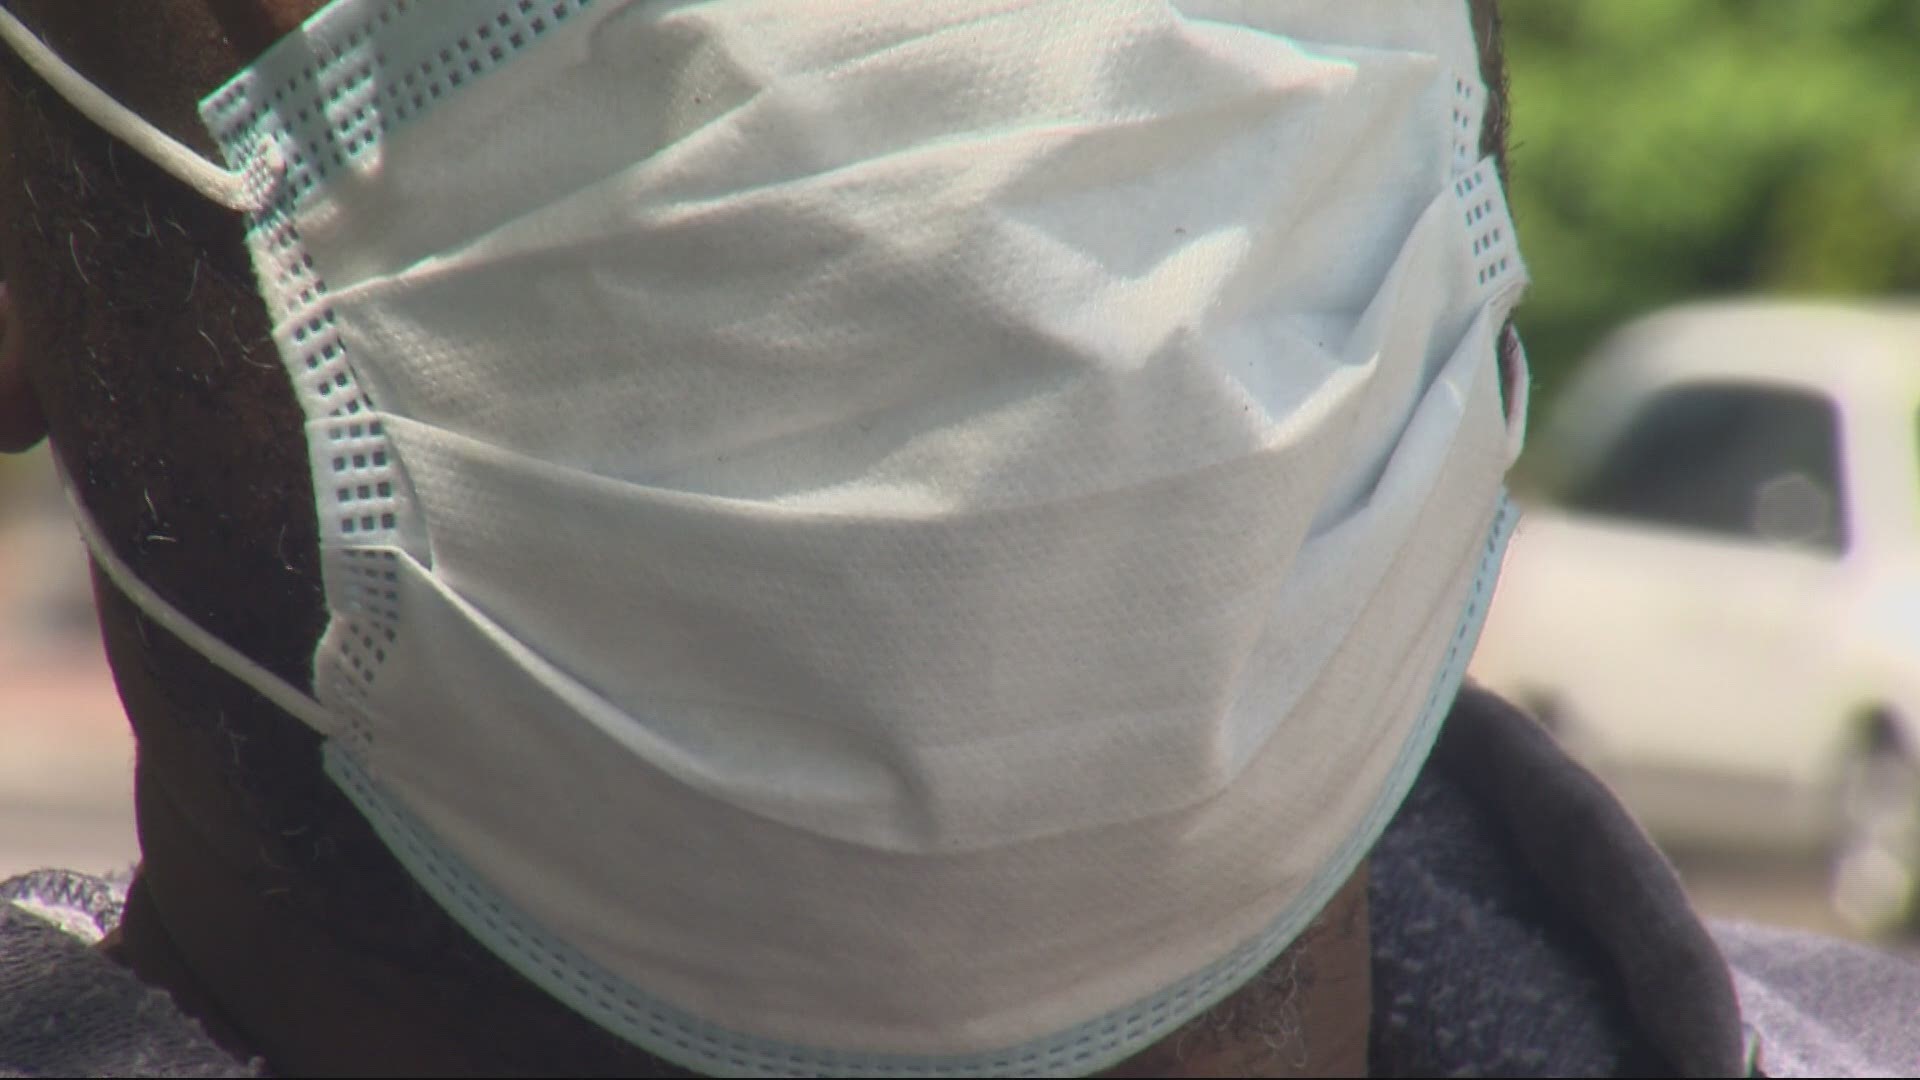 The Seattle area's health director is calling for a voluntary return to masks. The OHA's director said Oregon counties with low vaccine rates should return to masks.